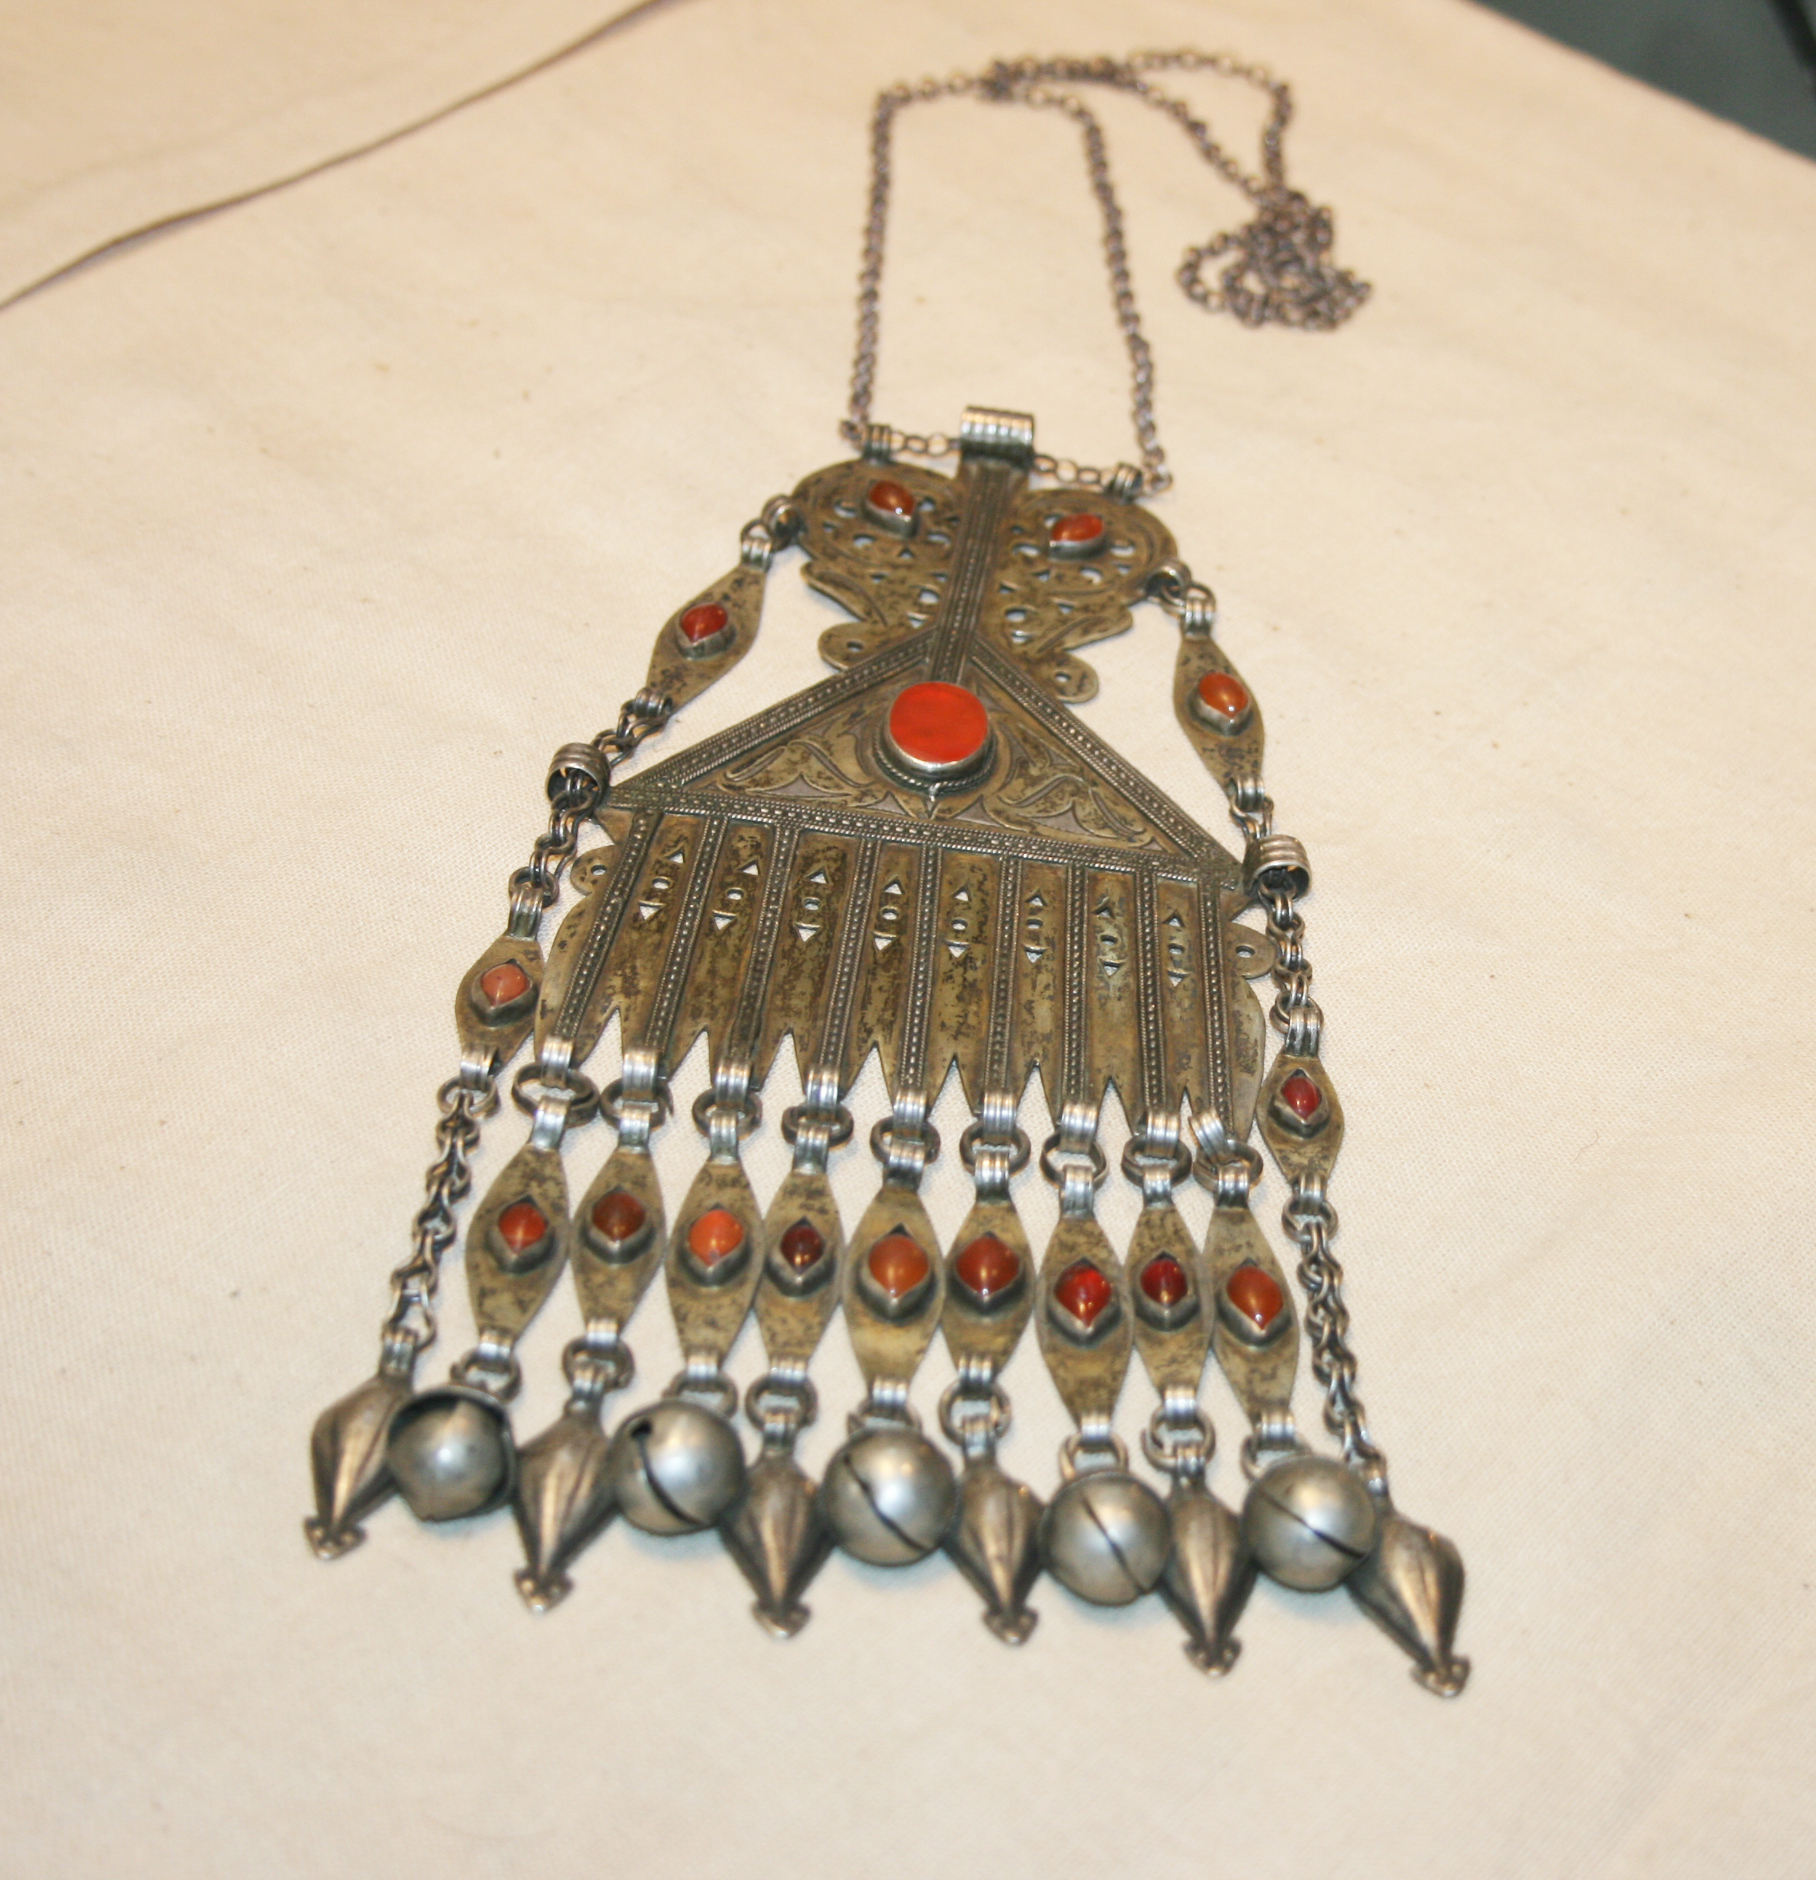 Old teke turkman 19th century necklace from Afghanistan